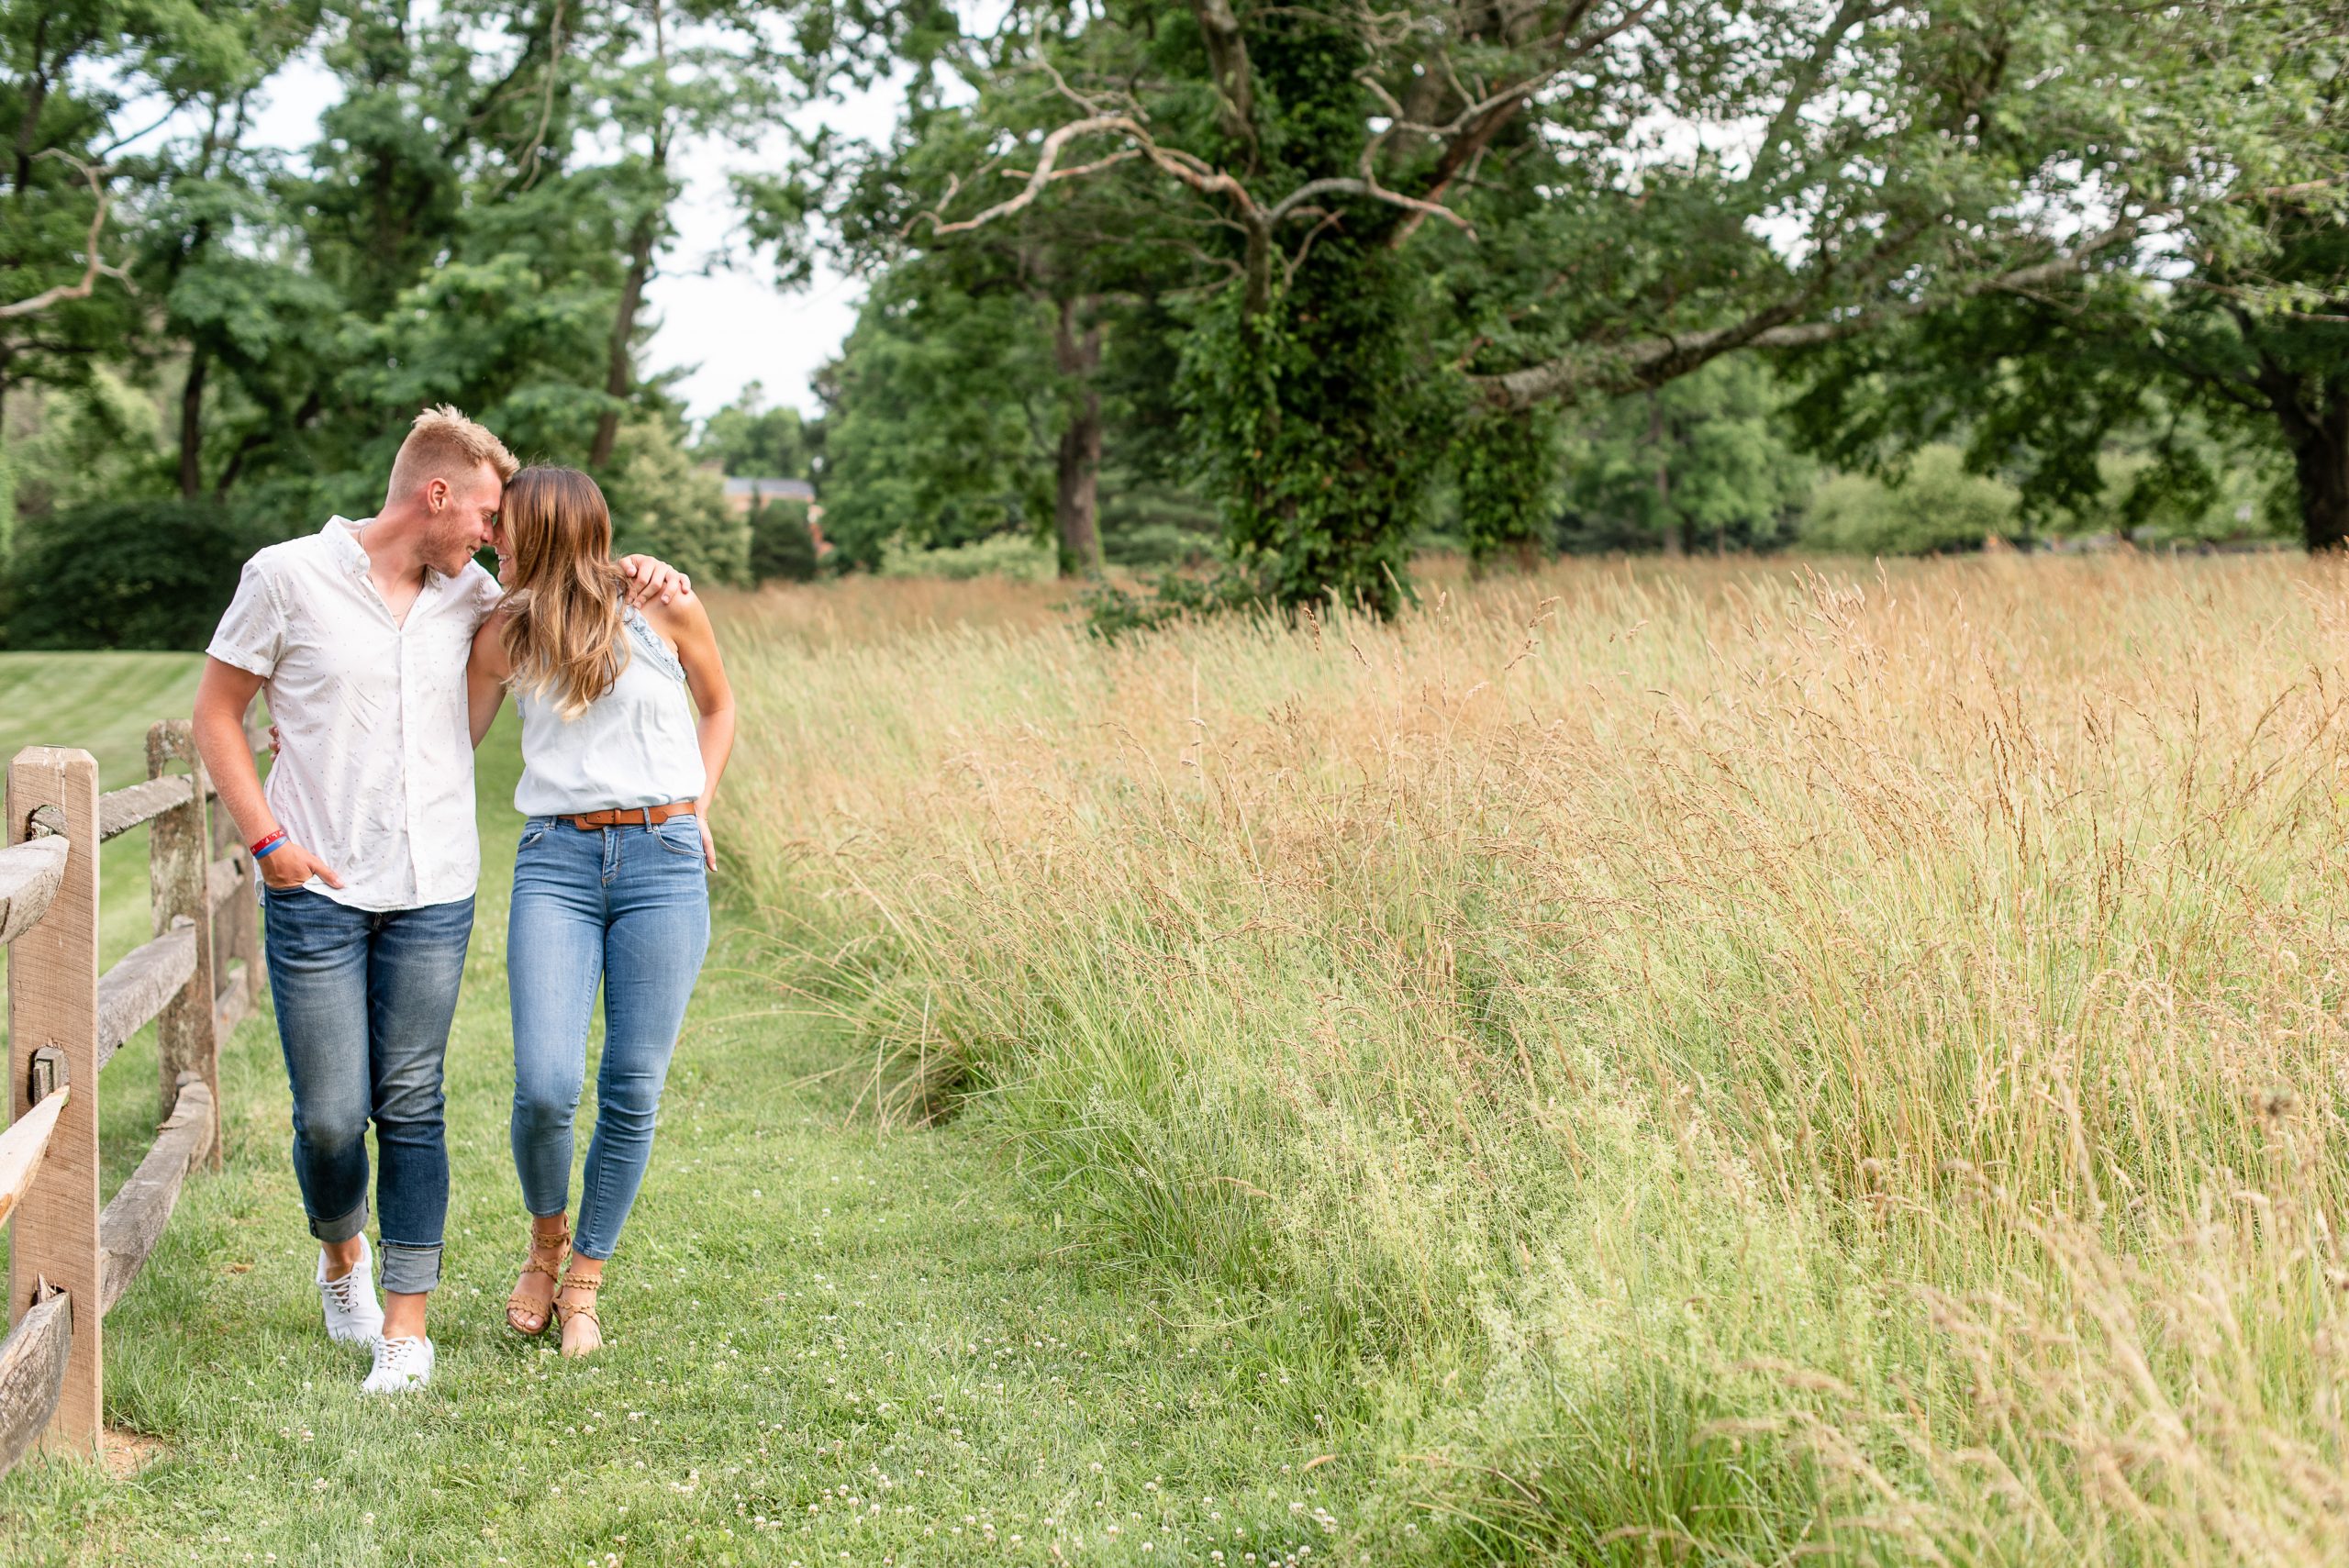 summer engagement session at a field of wild grasses